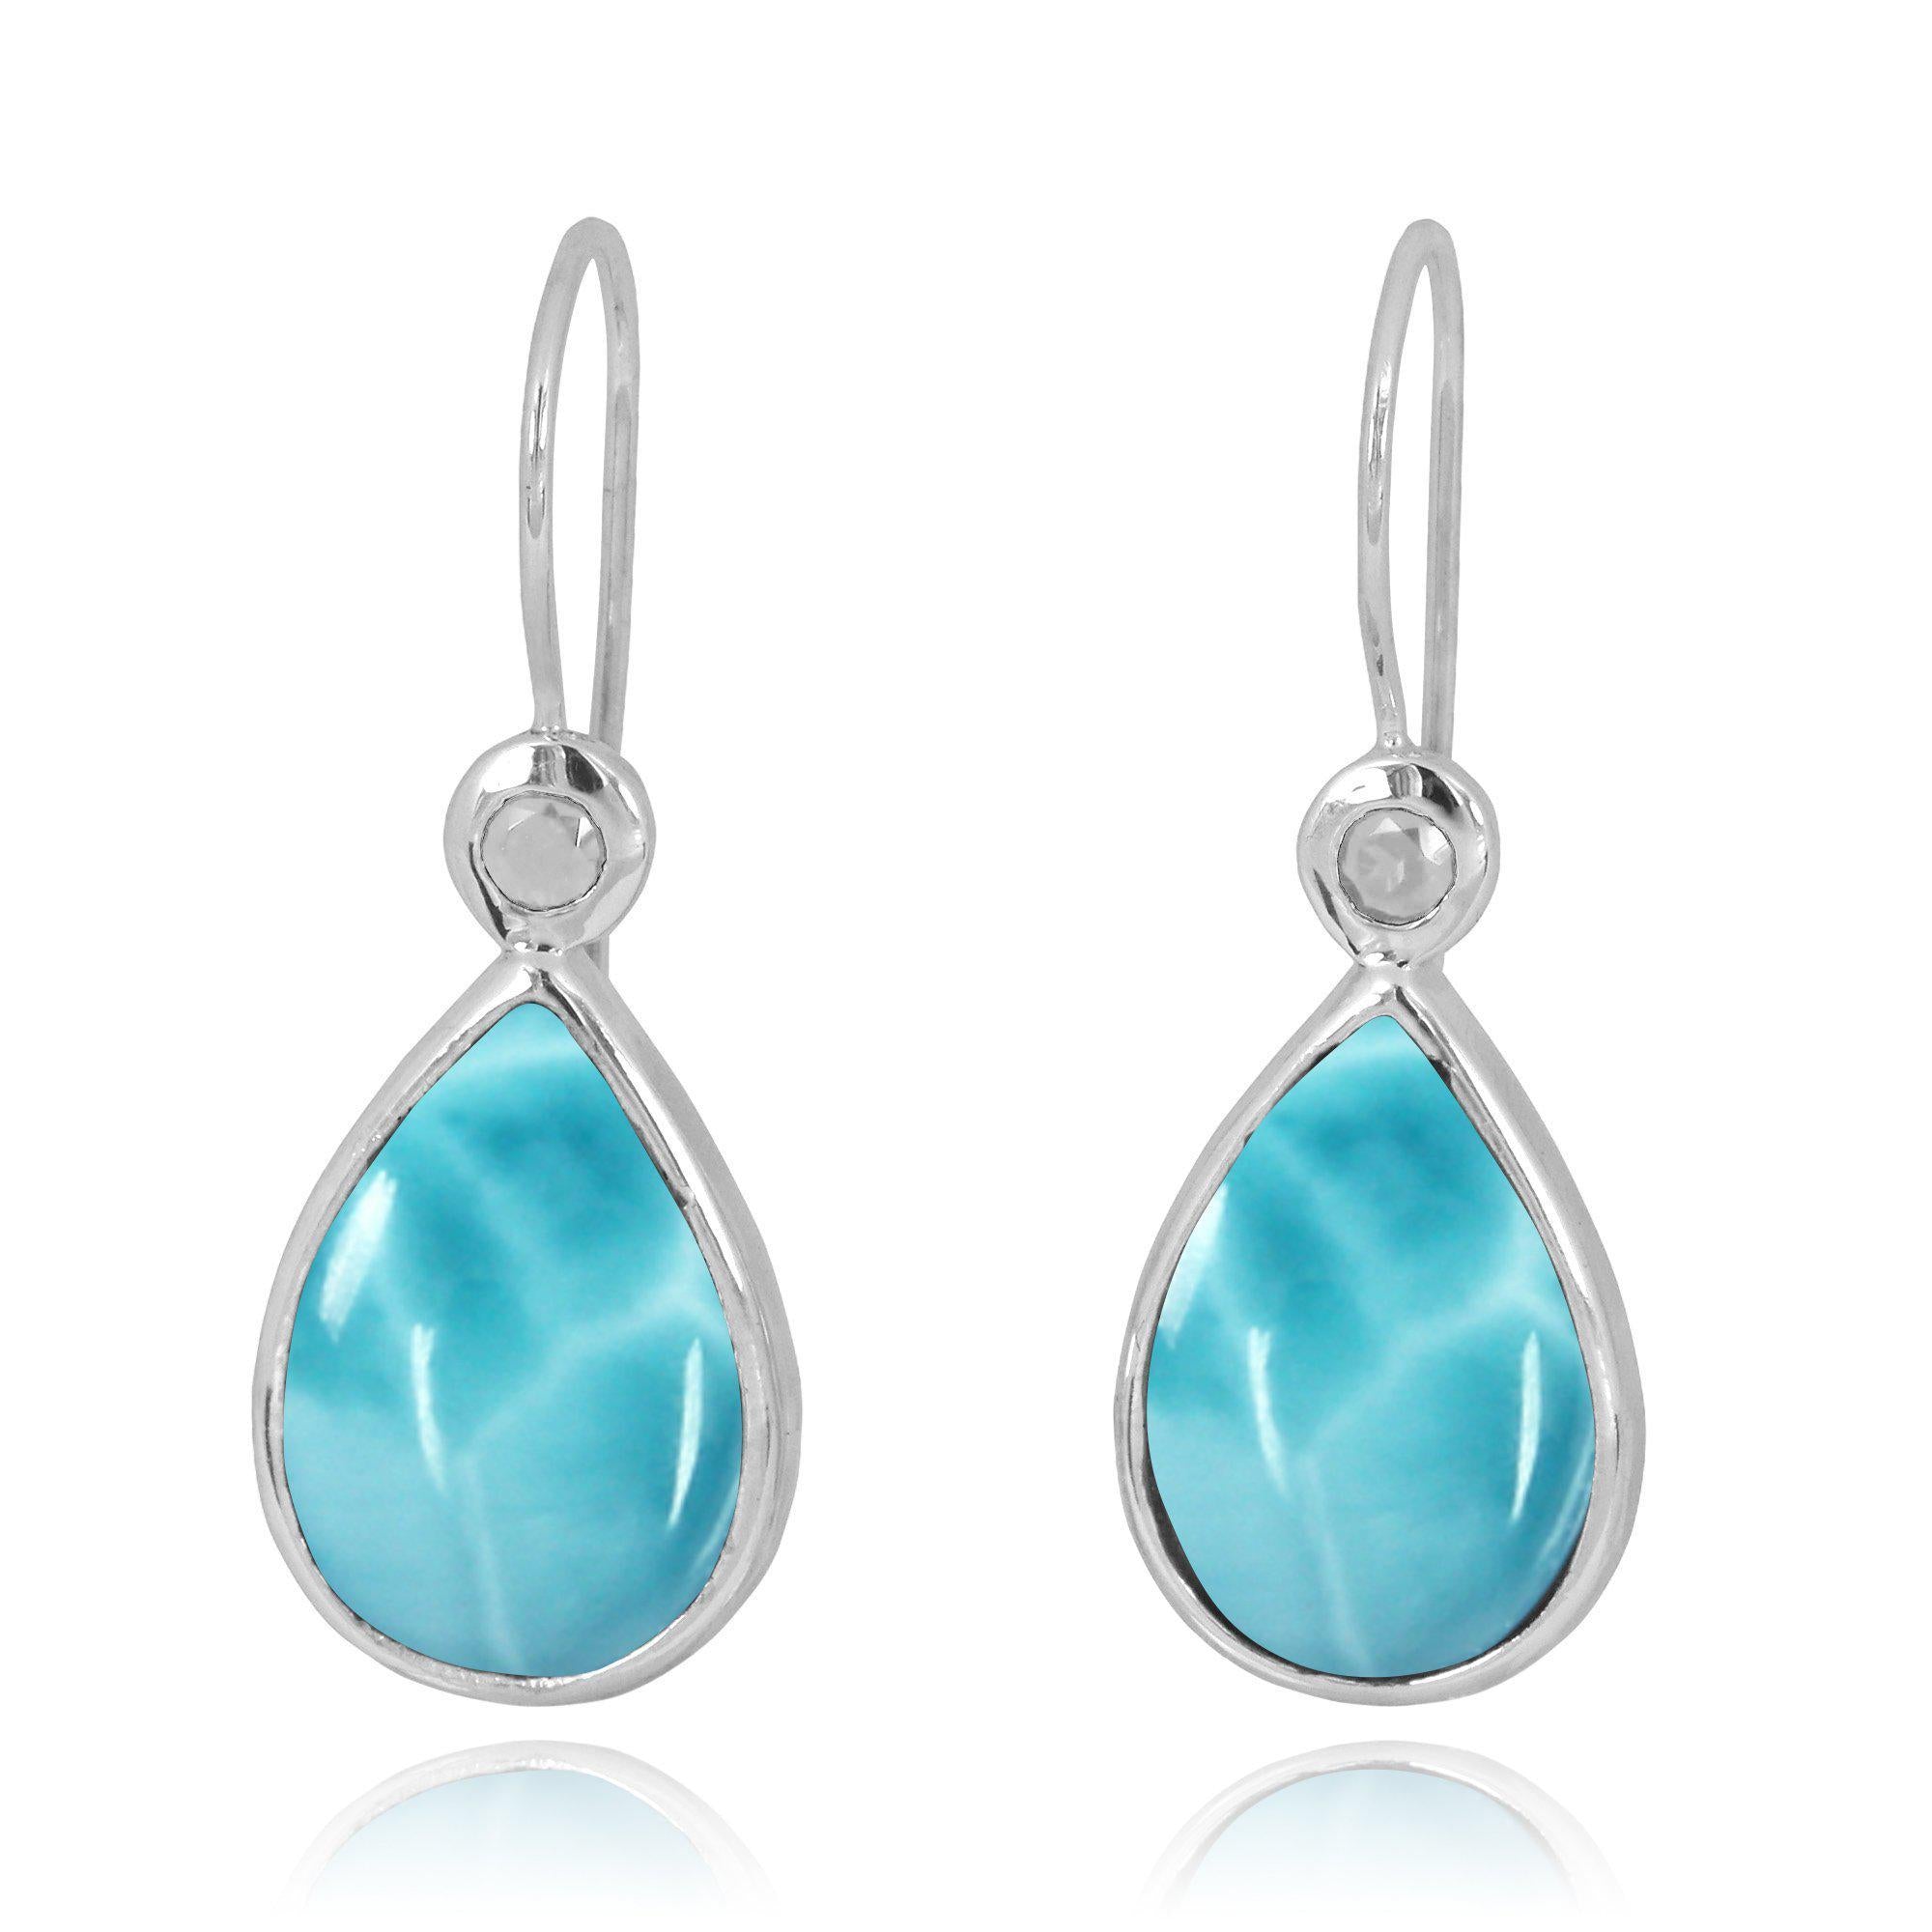 Larimar French Wire Earrings with 1 0 Shape White Topaz Stone